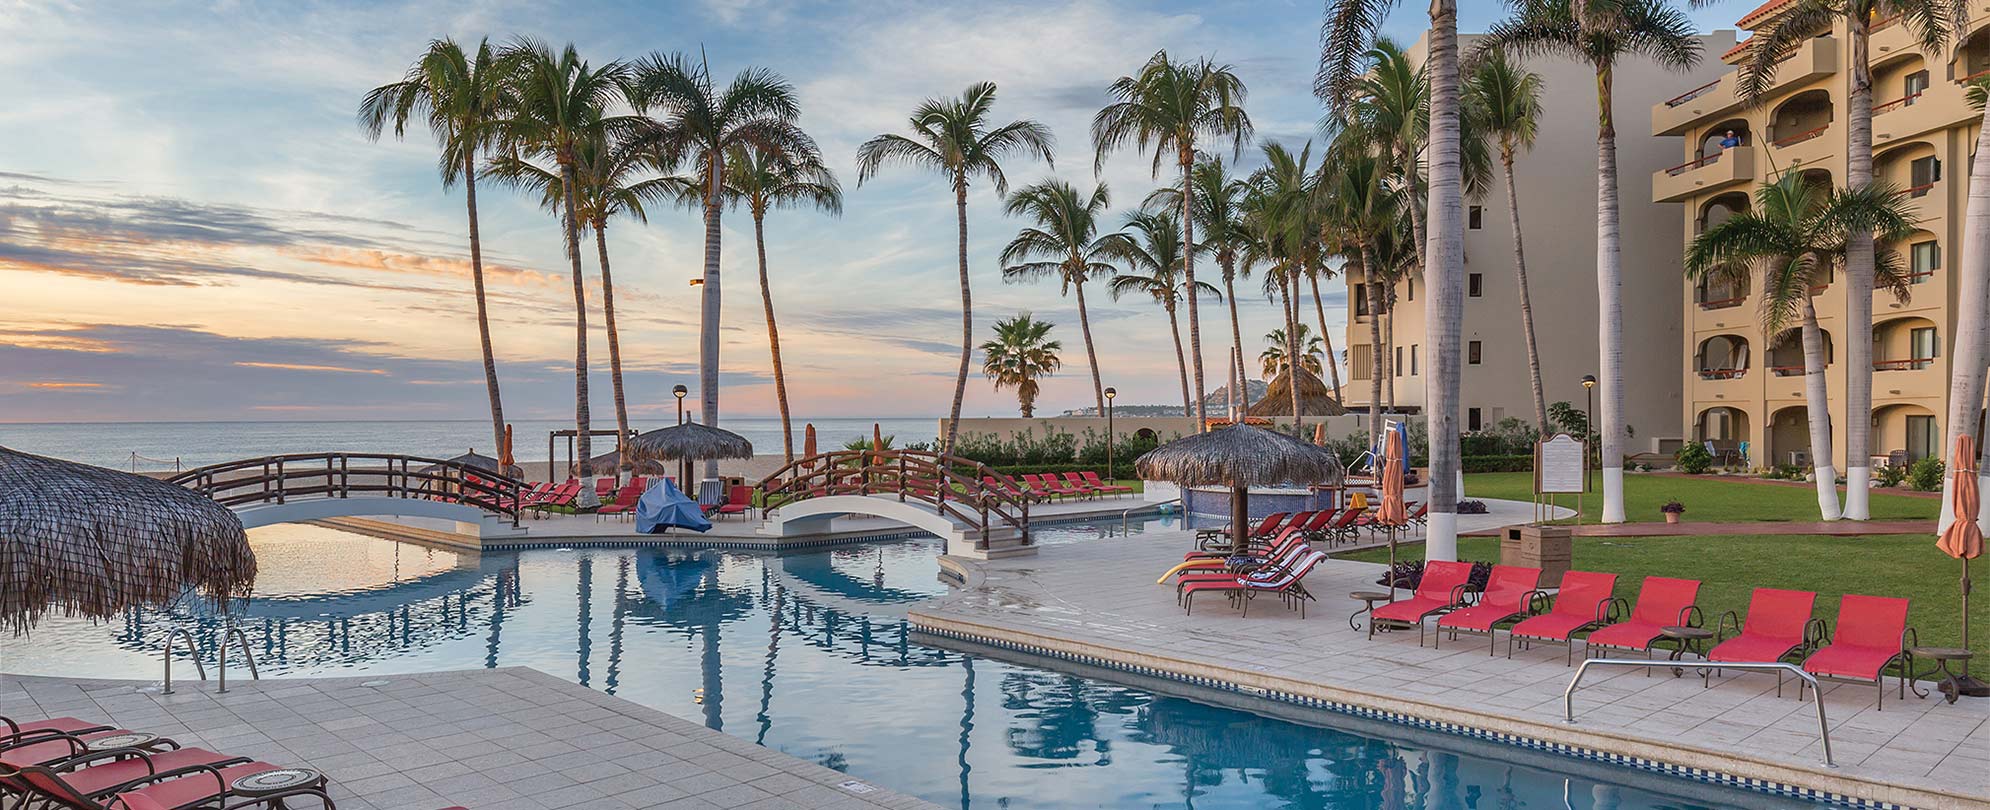 The oceanfront pool surrounded by lounge chairs and palm trees at WorldMark Coral Baja in San José del Cabo, Mexico.